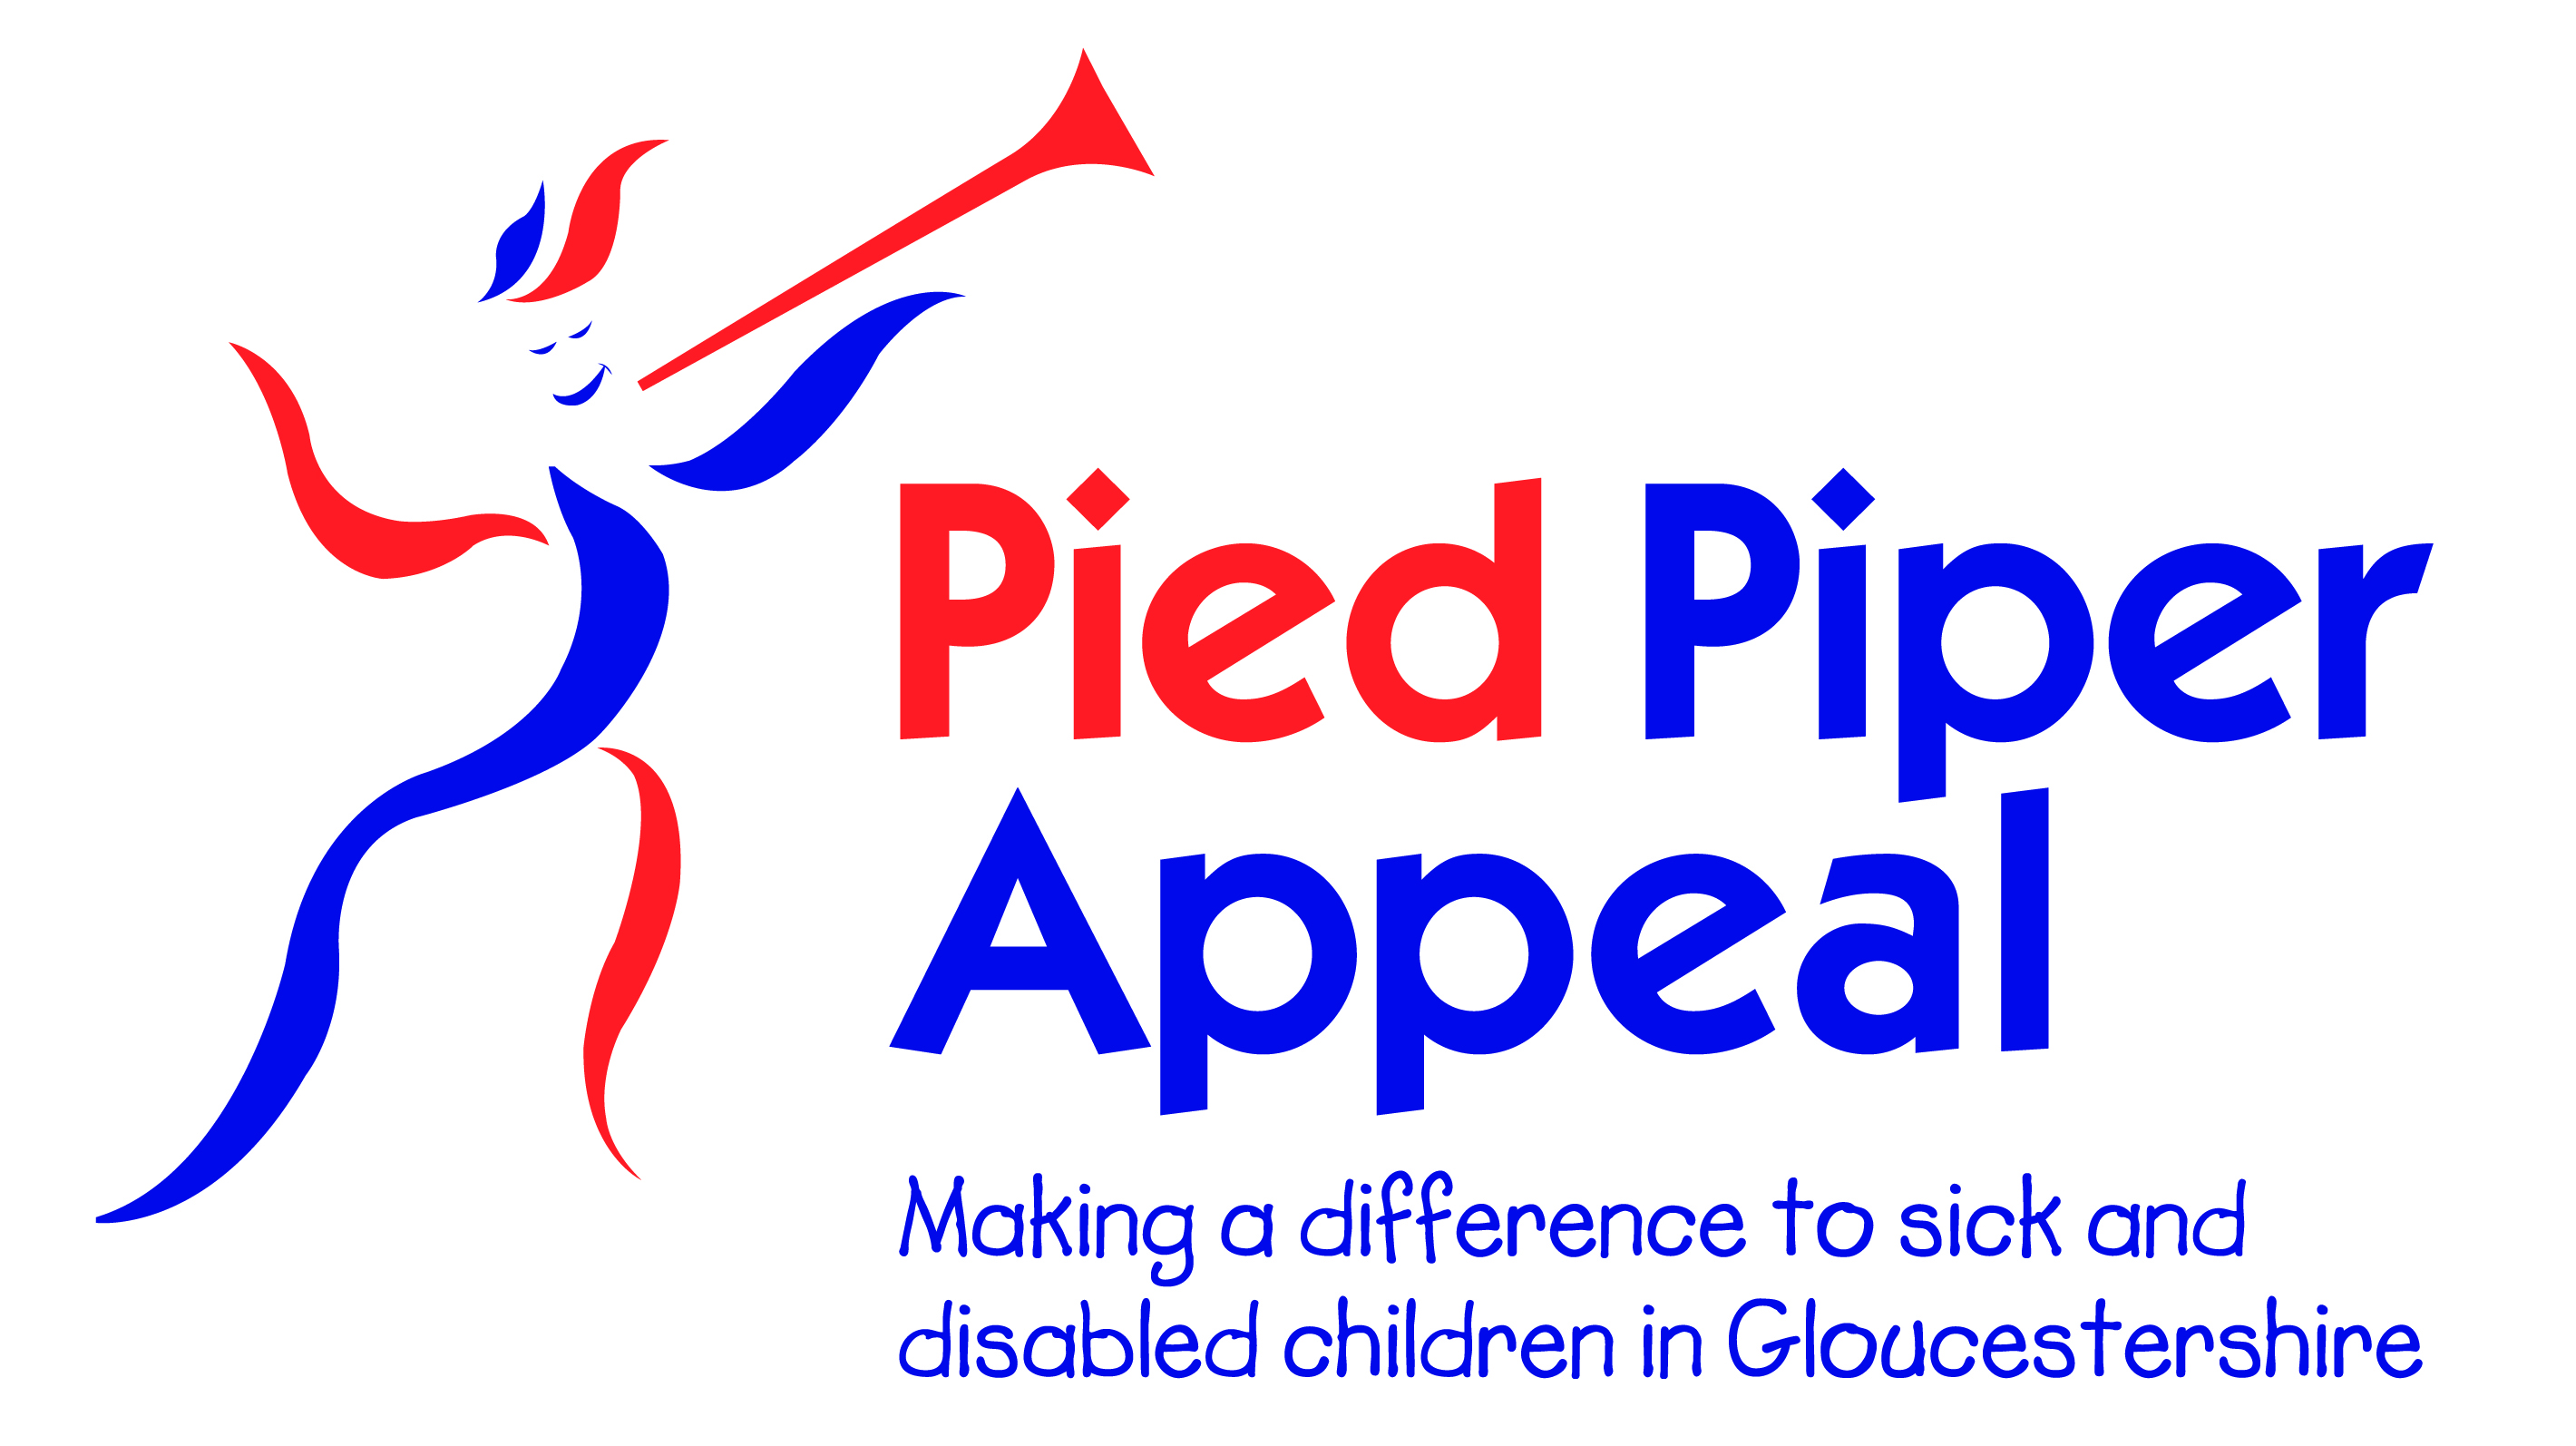 The Pied Piper Appeal logo | Randall & Payne corporate charity